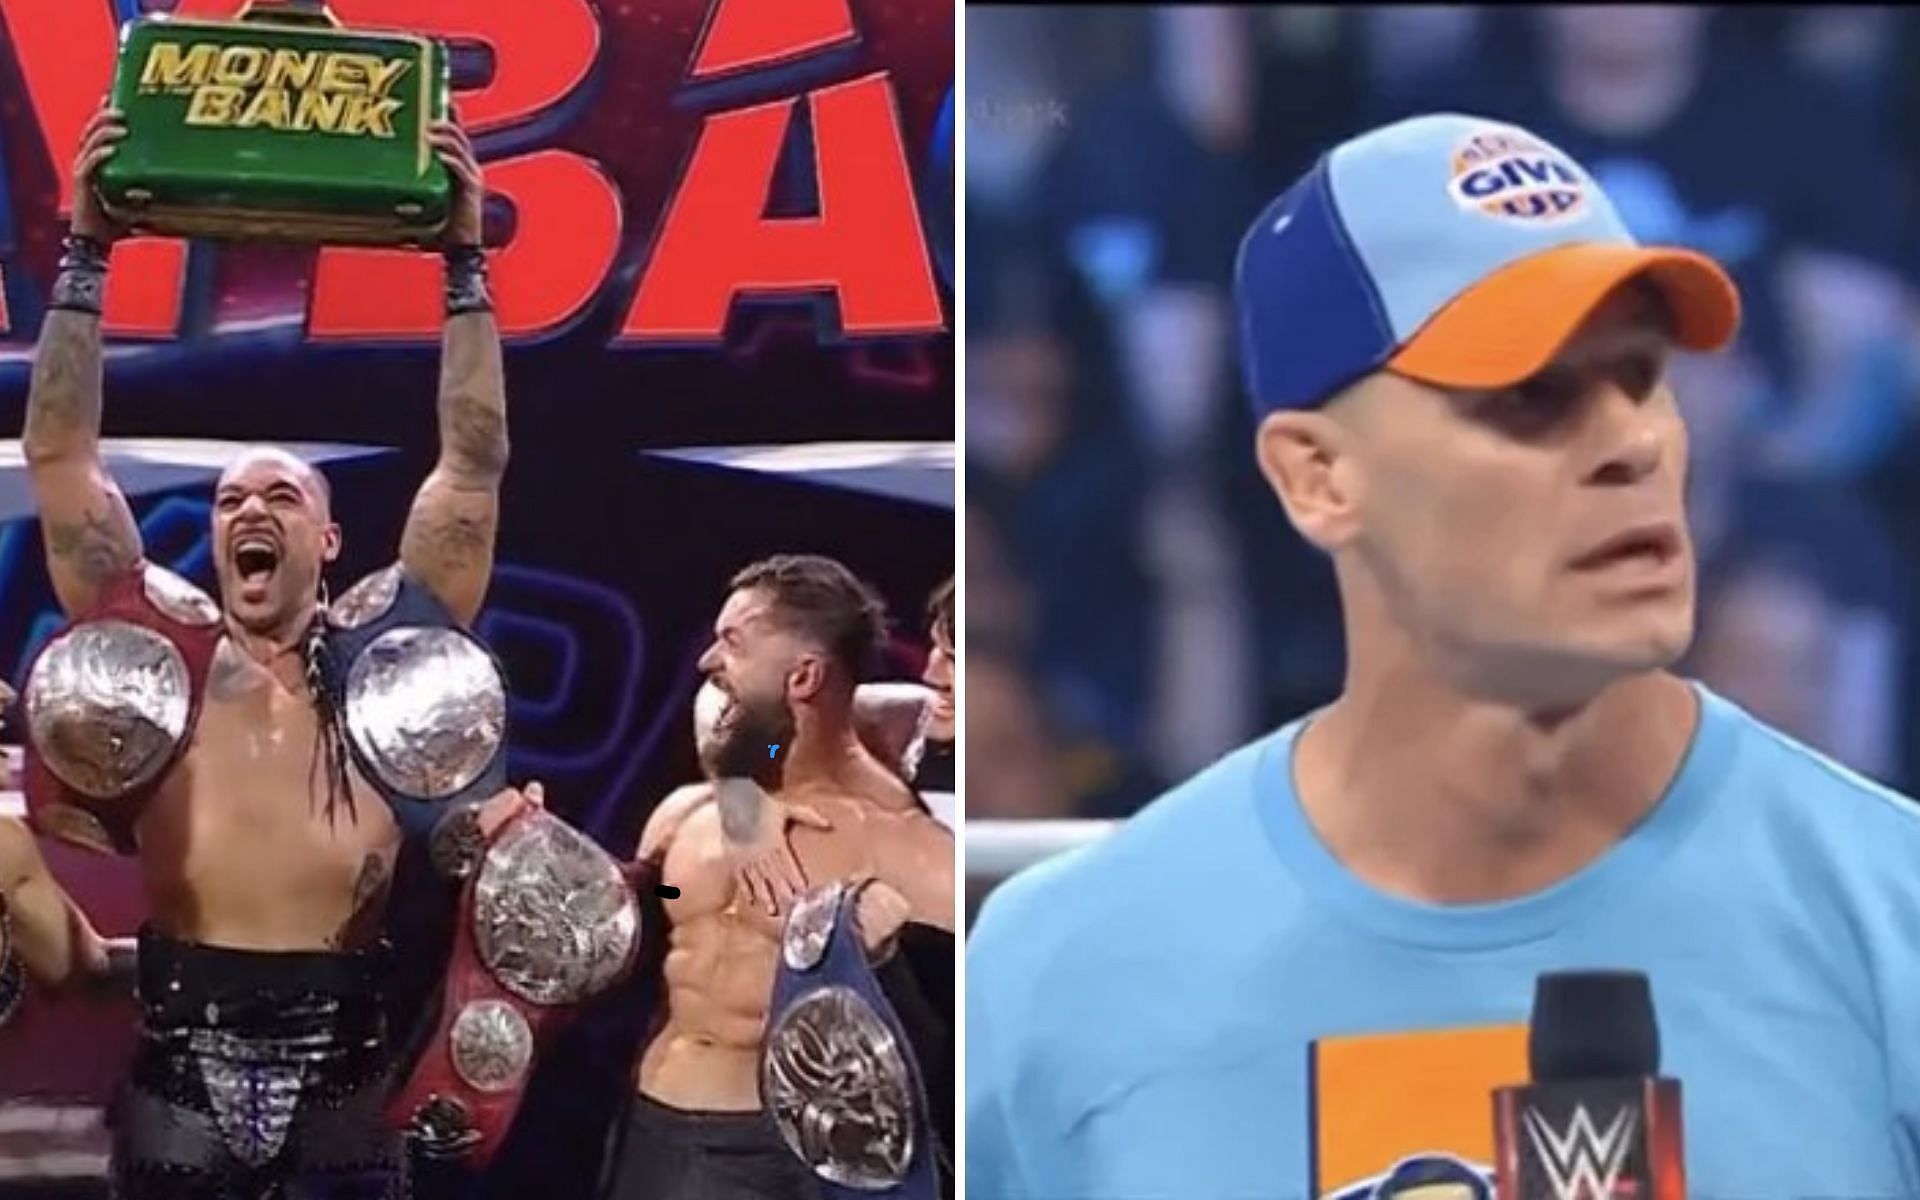 Cena is one title short of an accomplishment that Balor now has